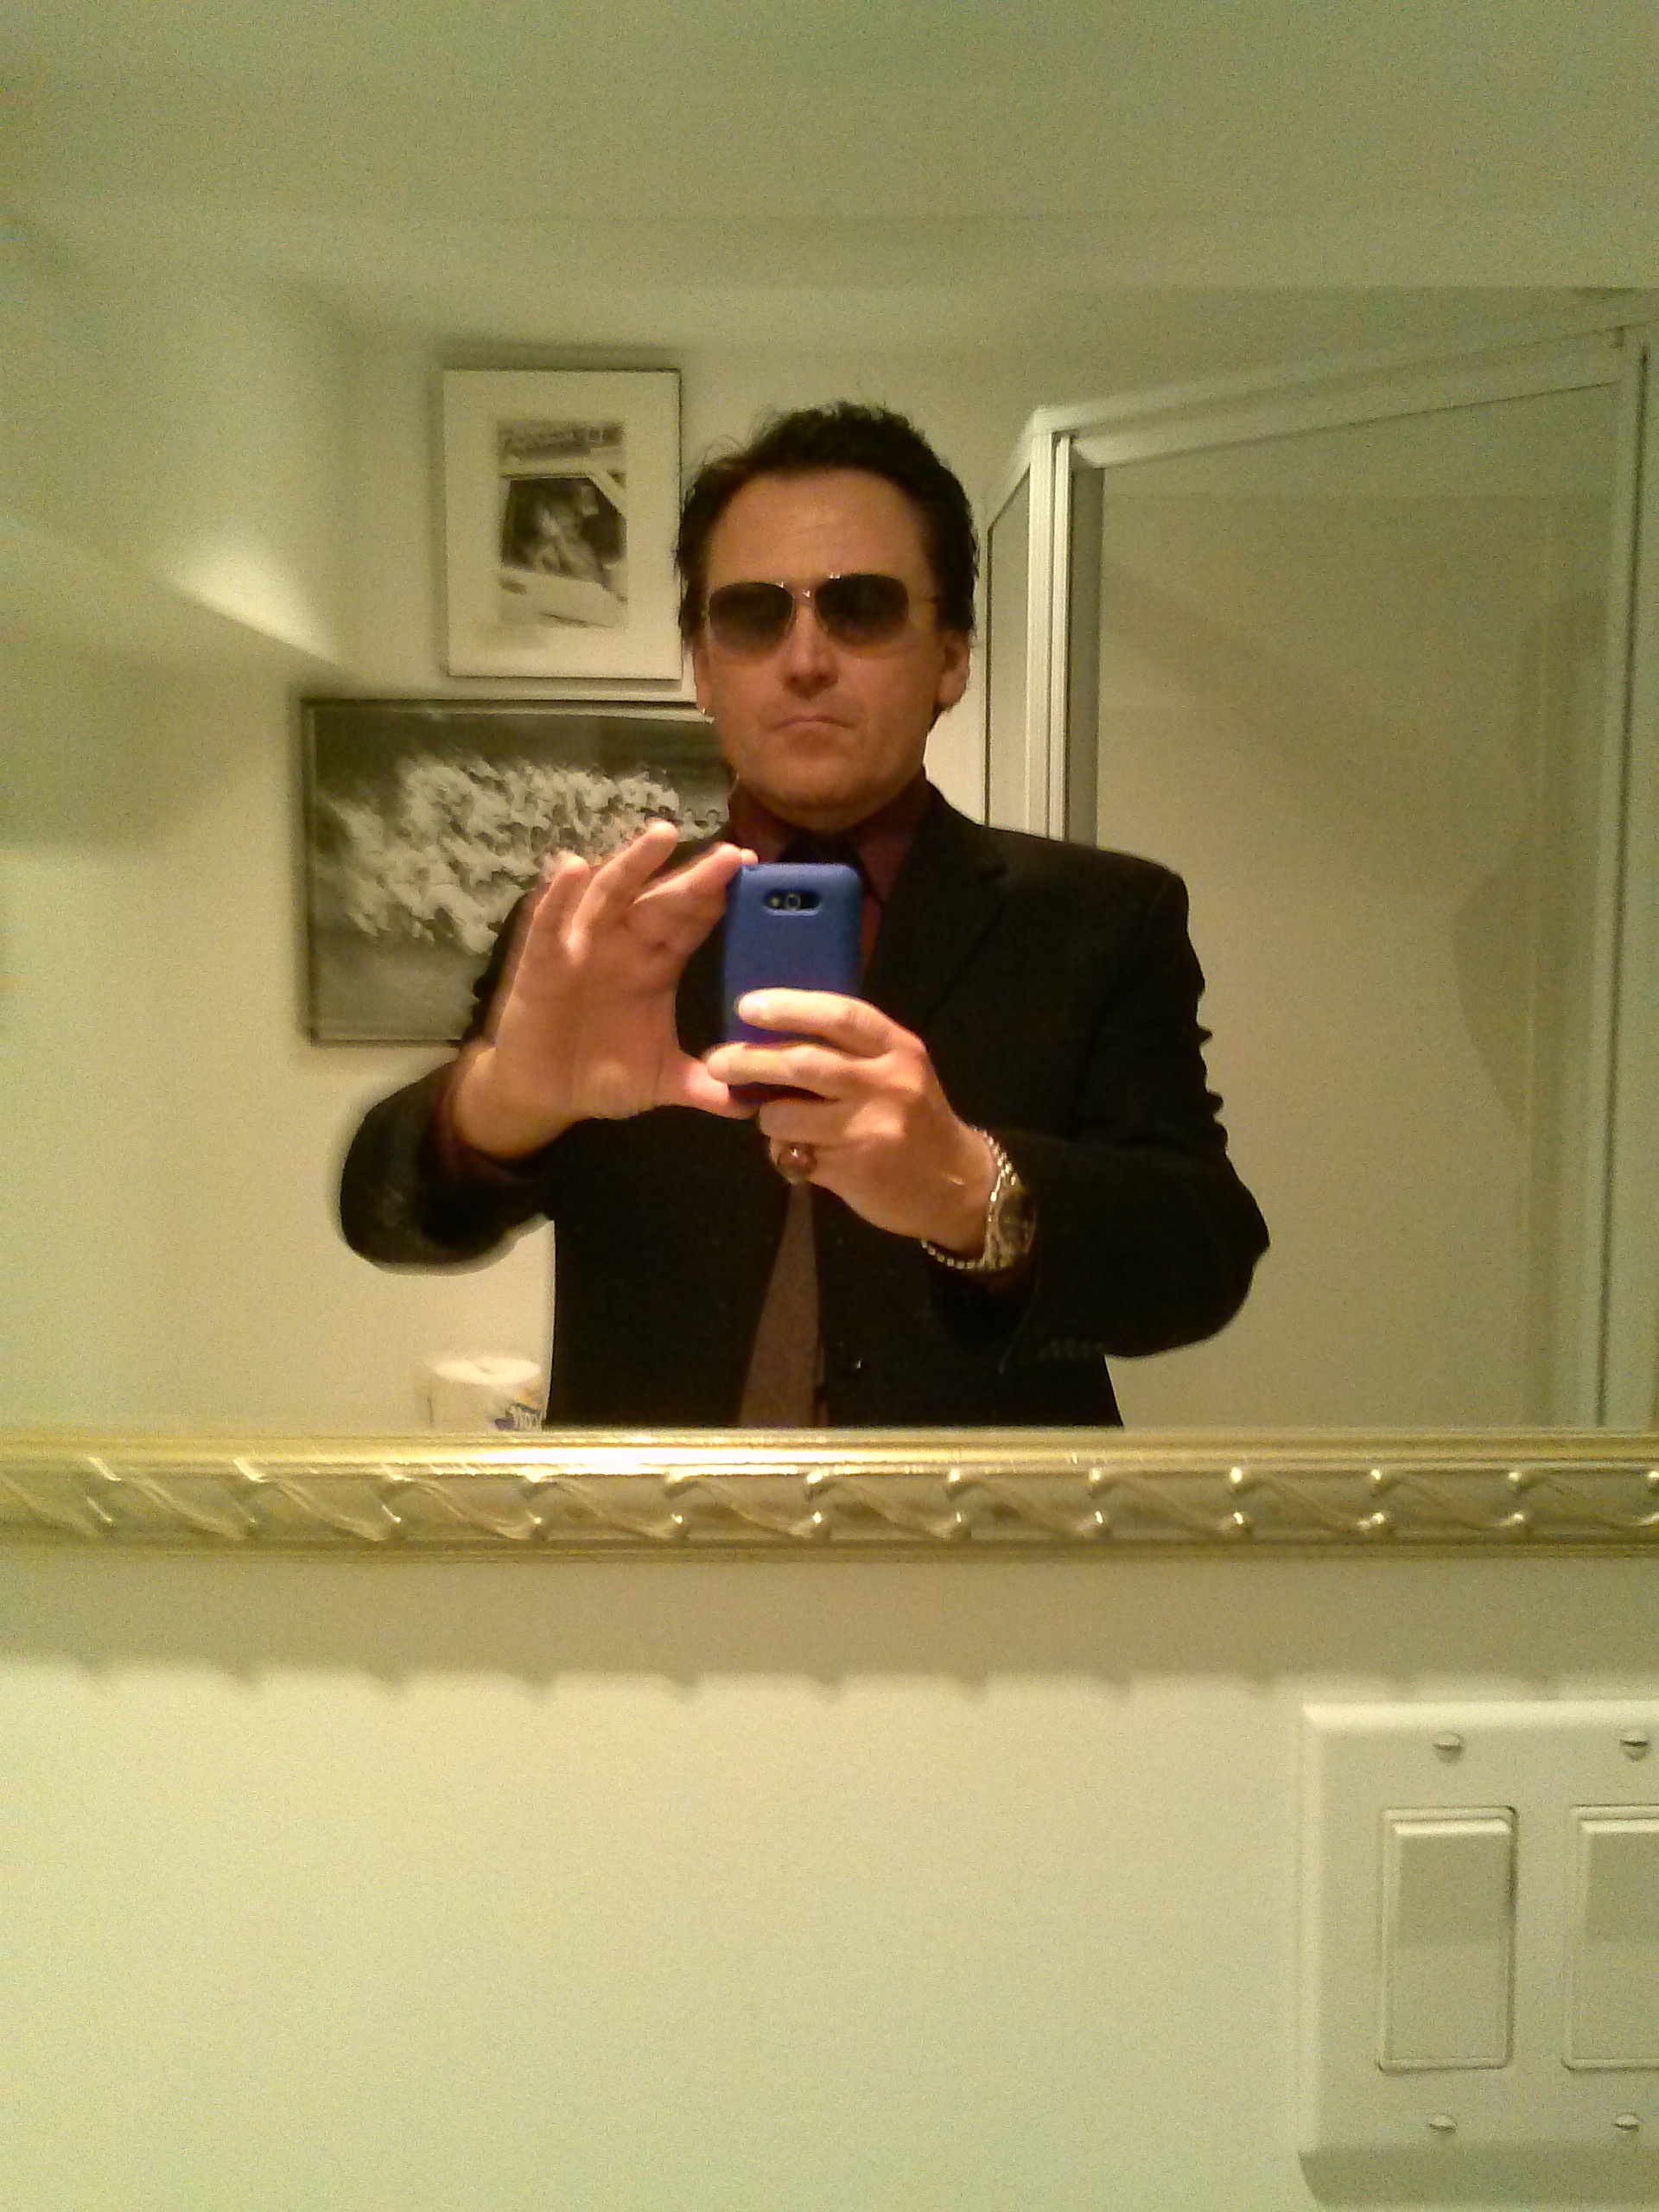 Genovese Mobster in National Geographic`s Inside the American Mob airing in July 2013